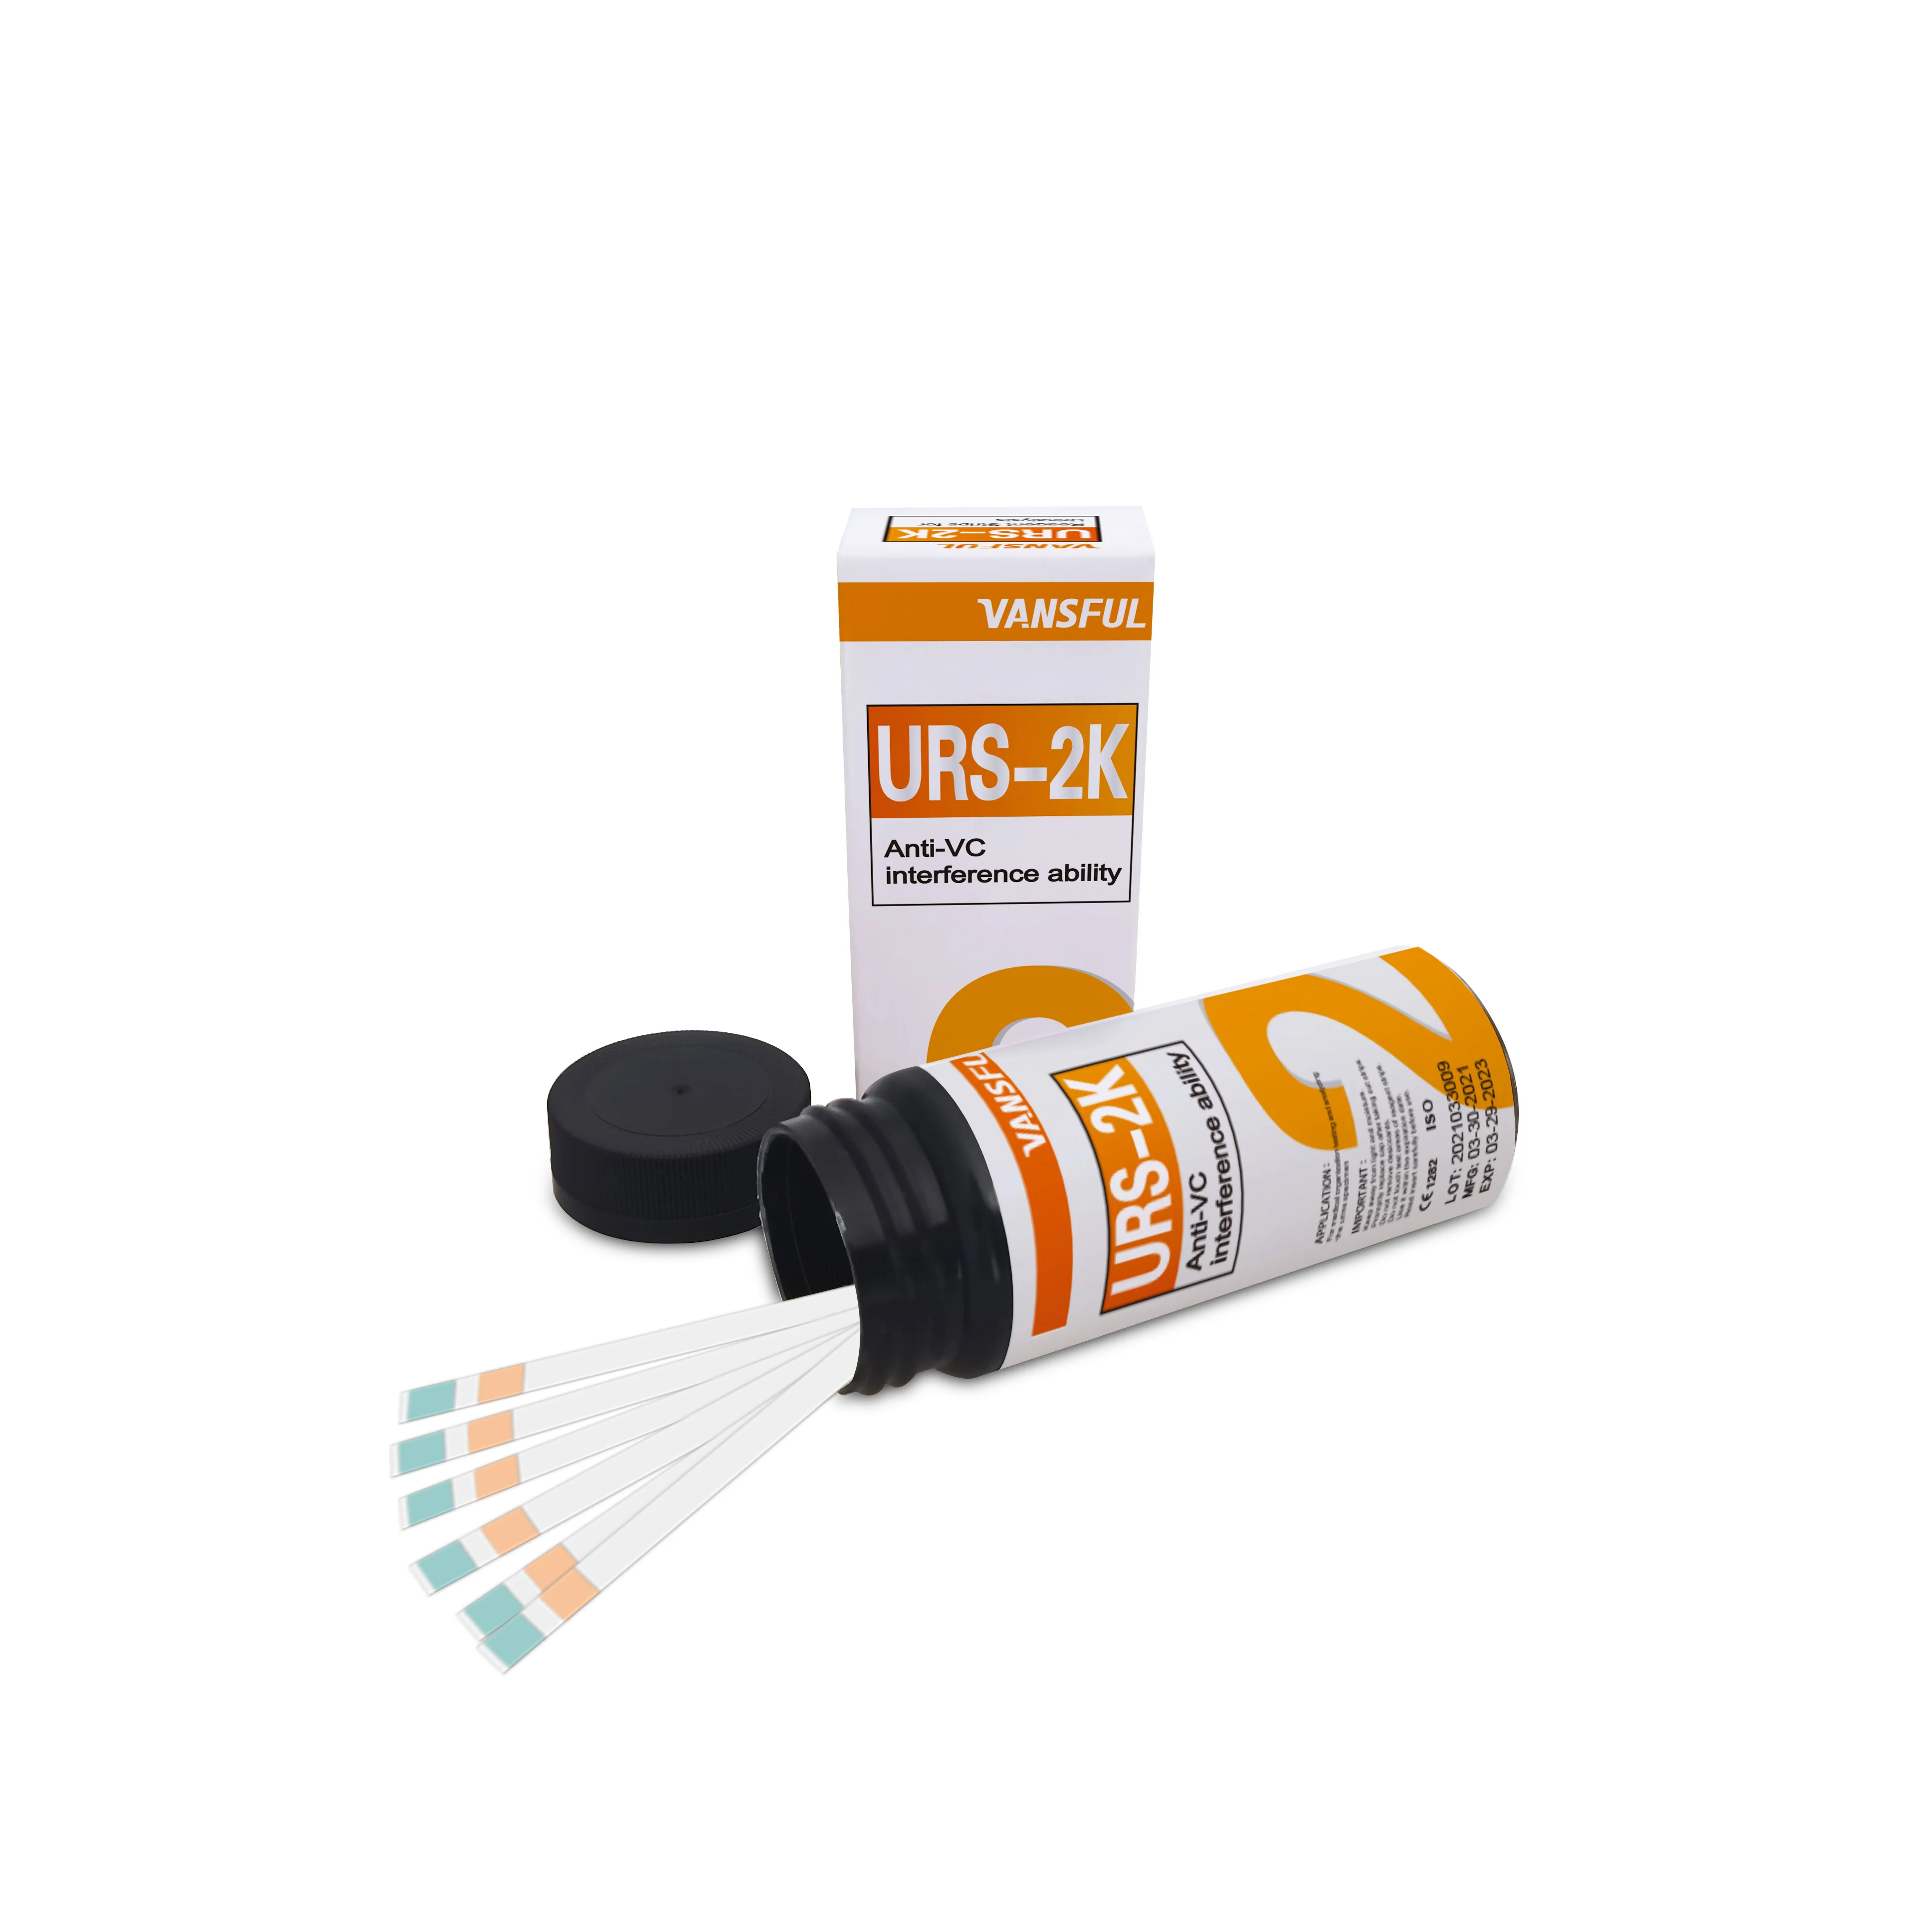 Widely Used Glucose and Ketone Reagent Test Strips URS 2K for Urine Test Diabetic Test Strips (1600379666236)